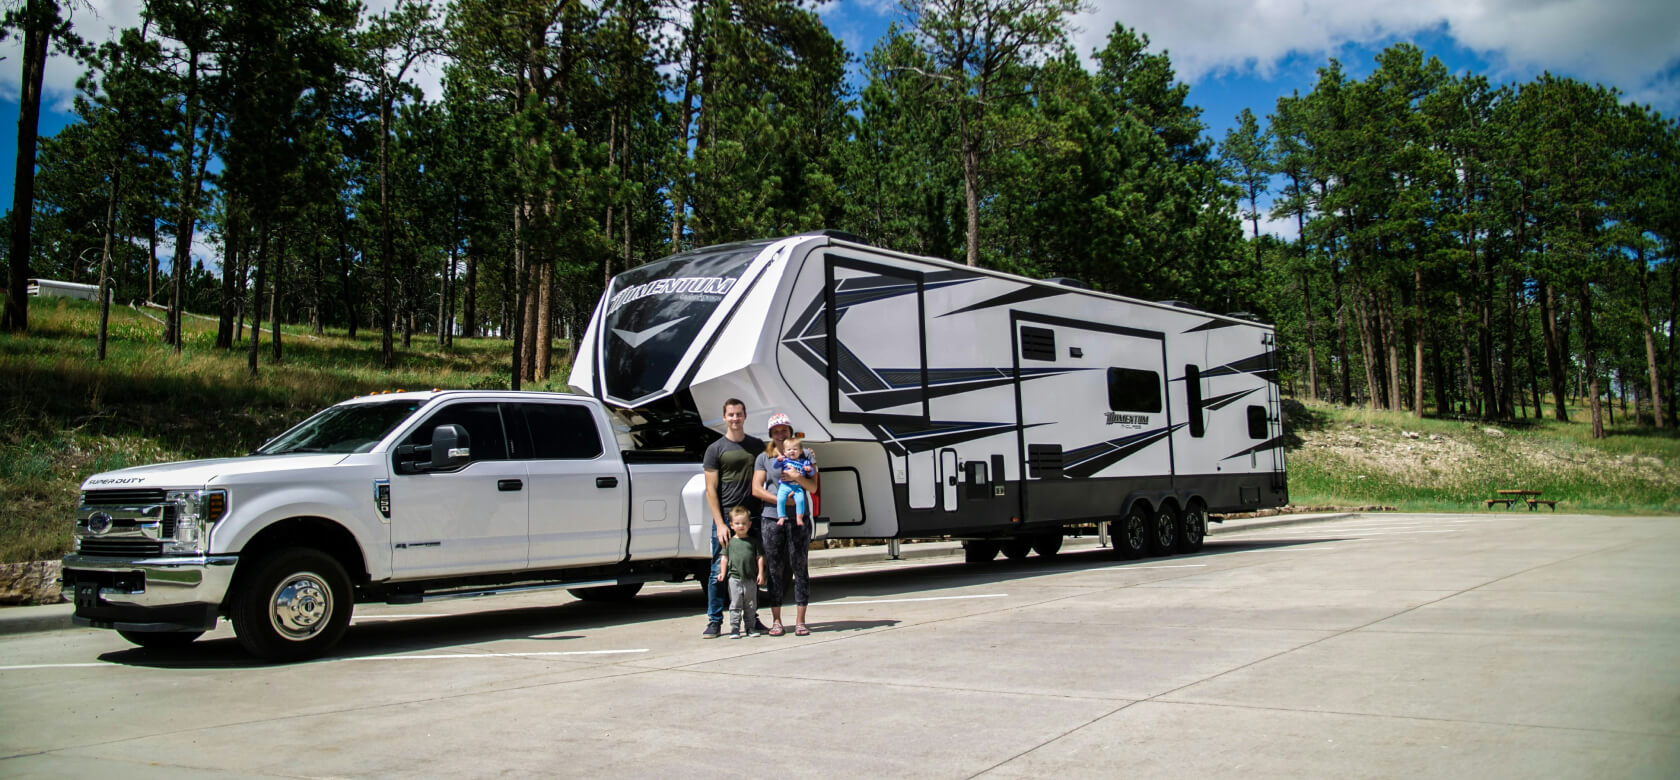 Family with RV and truck at campground